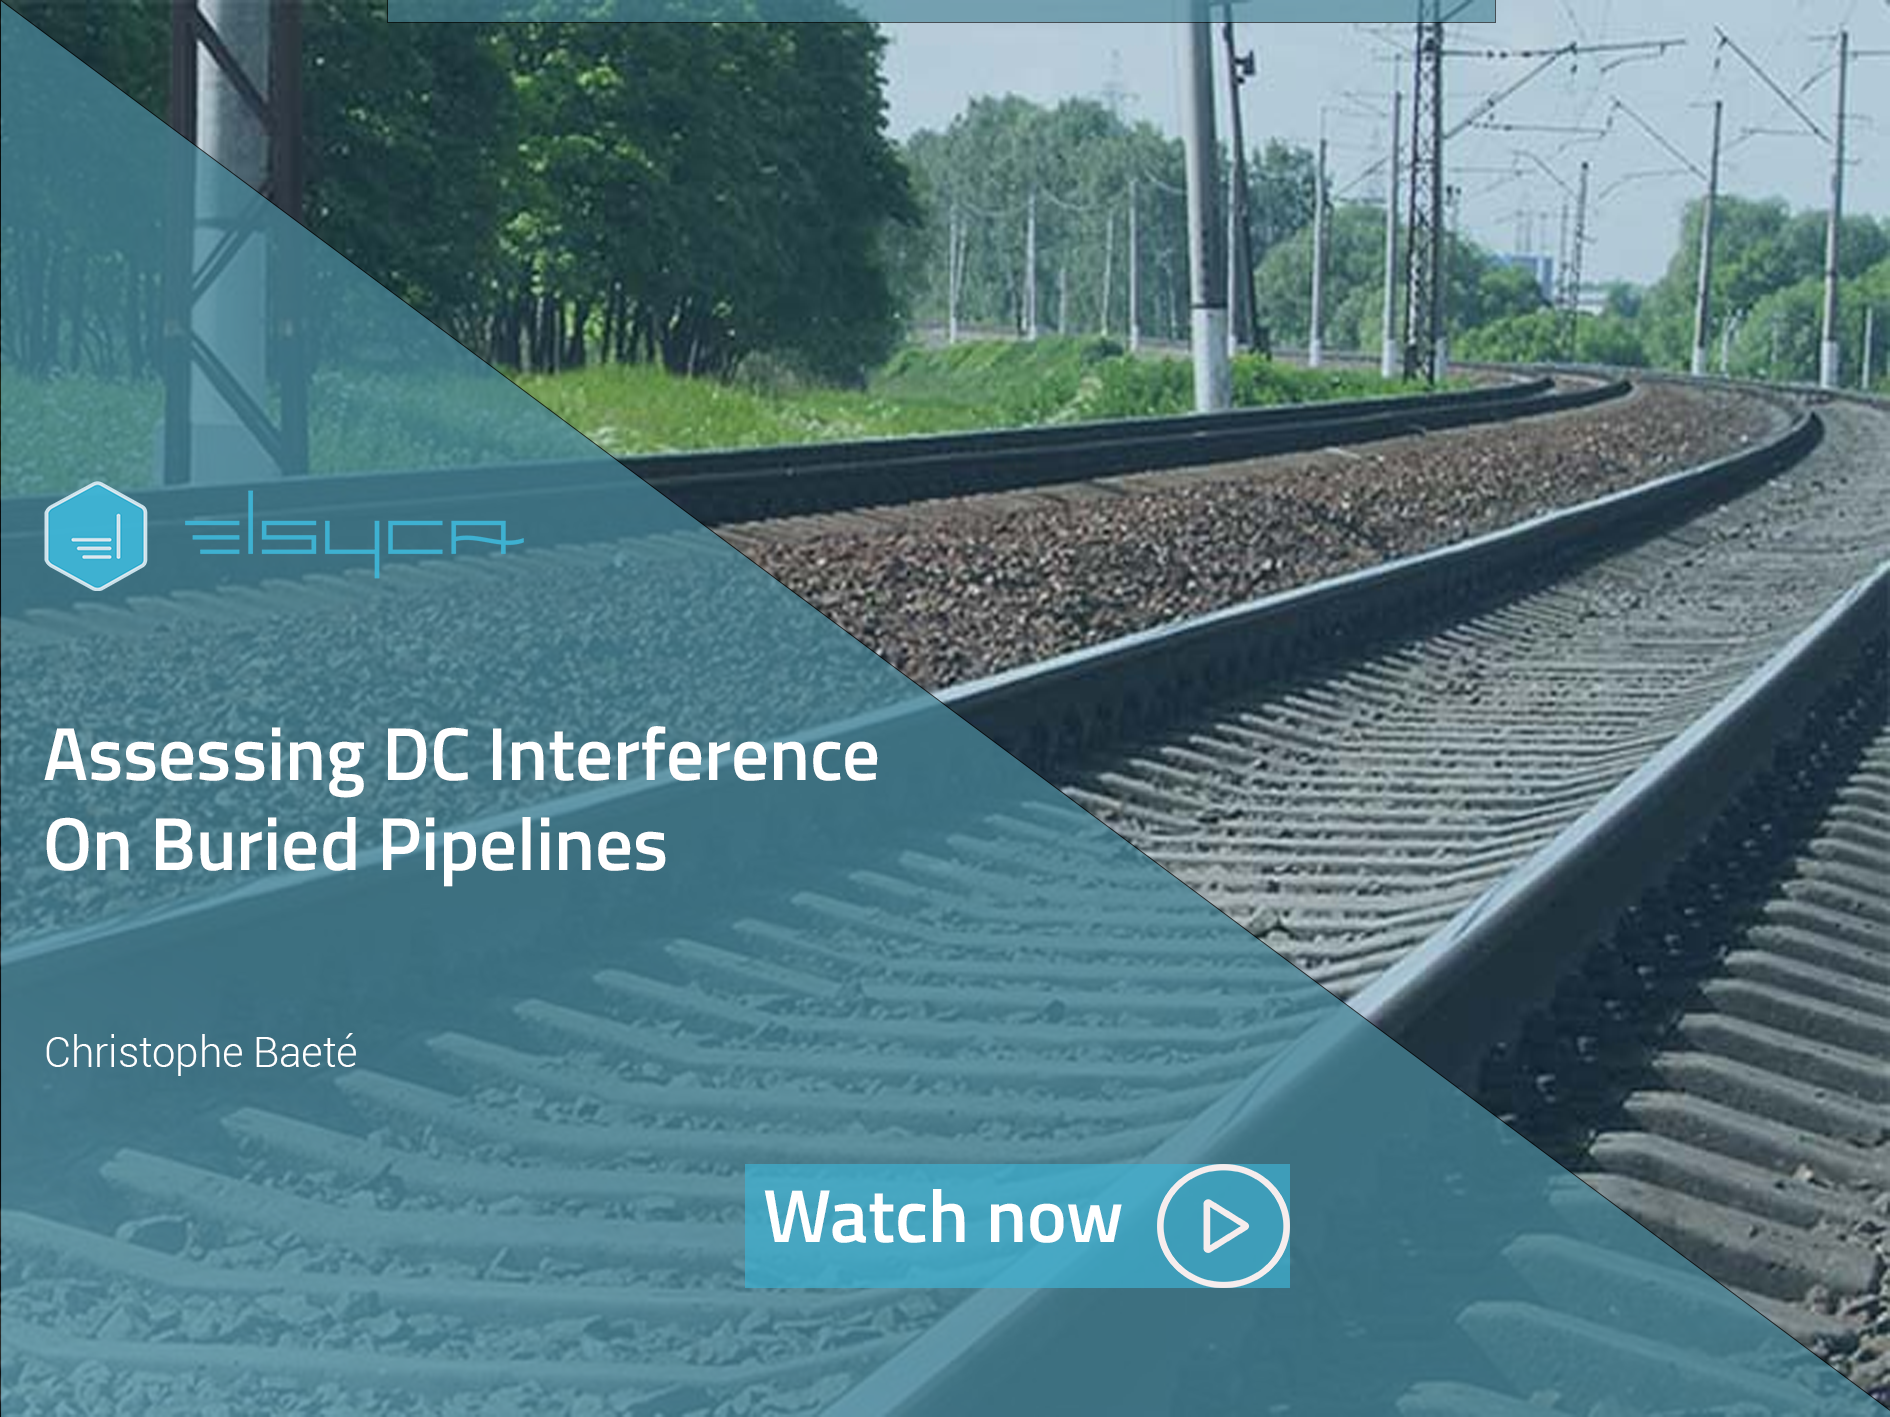 Assessing DC Interference On Buried Pipelines